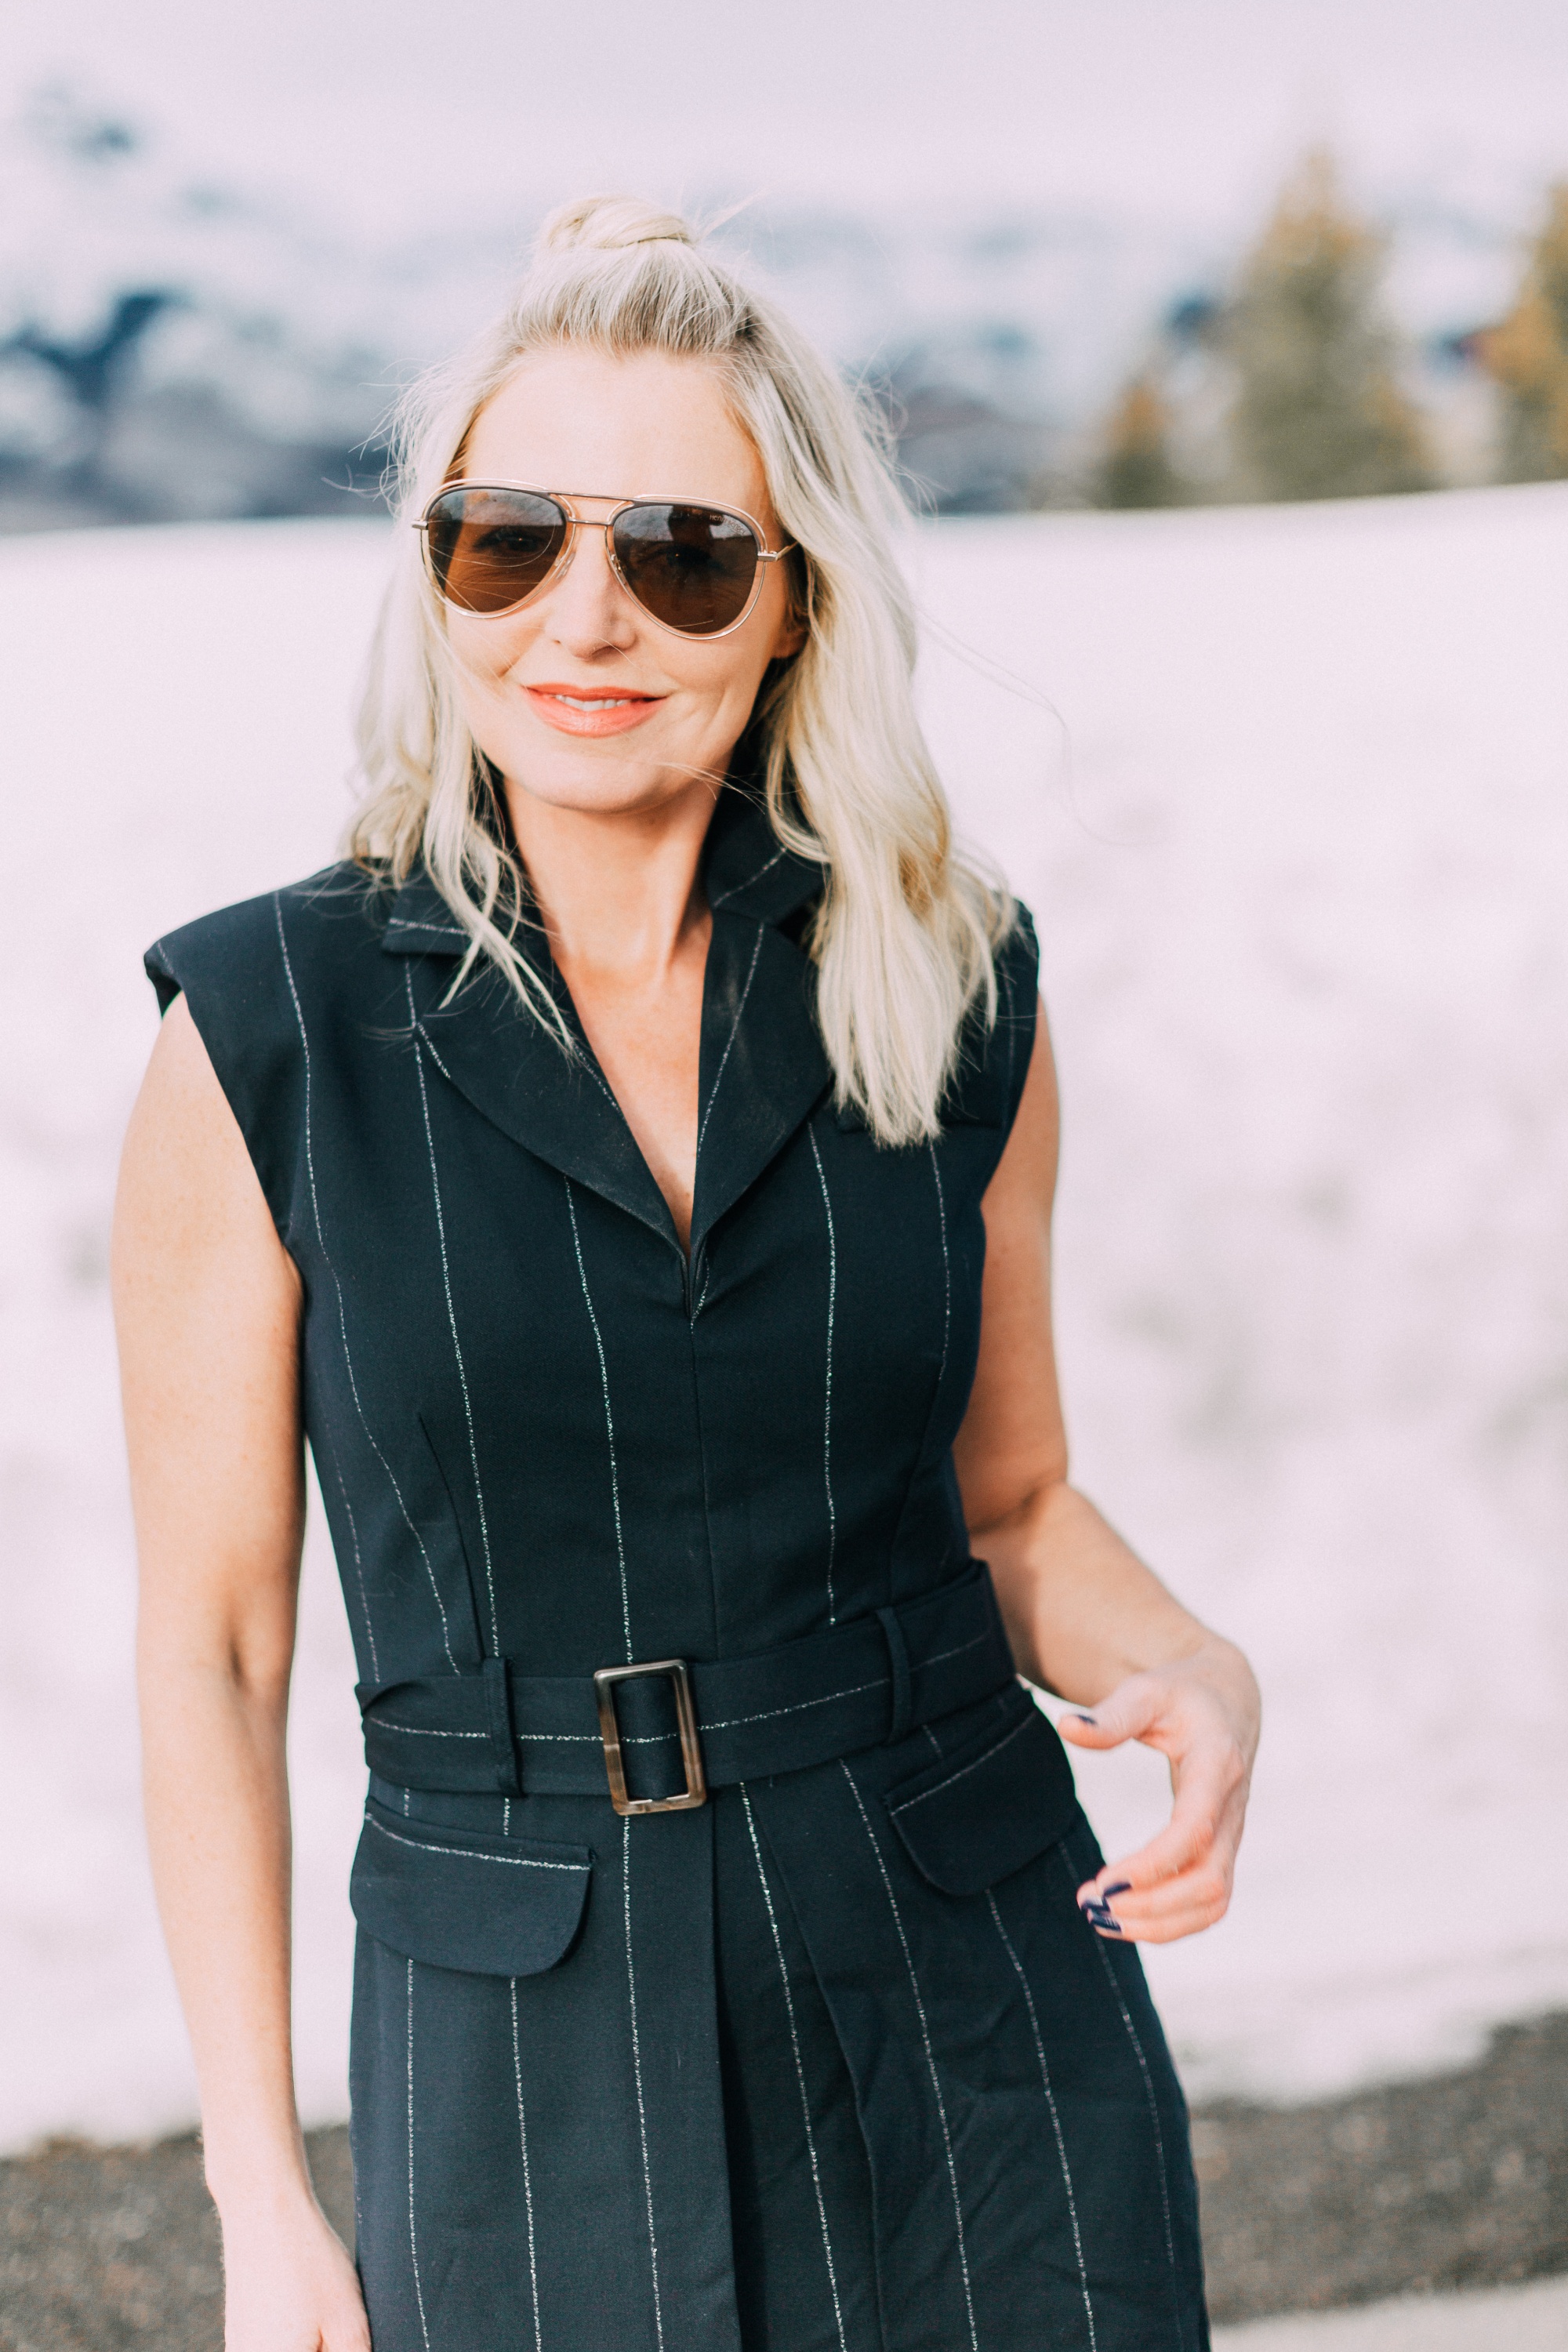 Spring Office Dress, fashion blogger Erin Busbee of BusbeeStyle.com wearing a navy pinstripe dress from Asos with black Jimmy Choo pumps in Telluride, Colorado, talking about dresses for the office